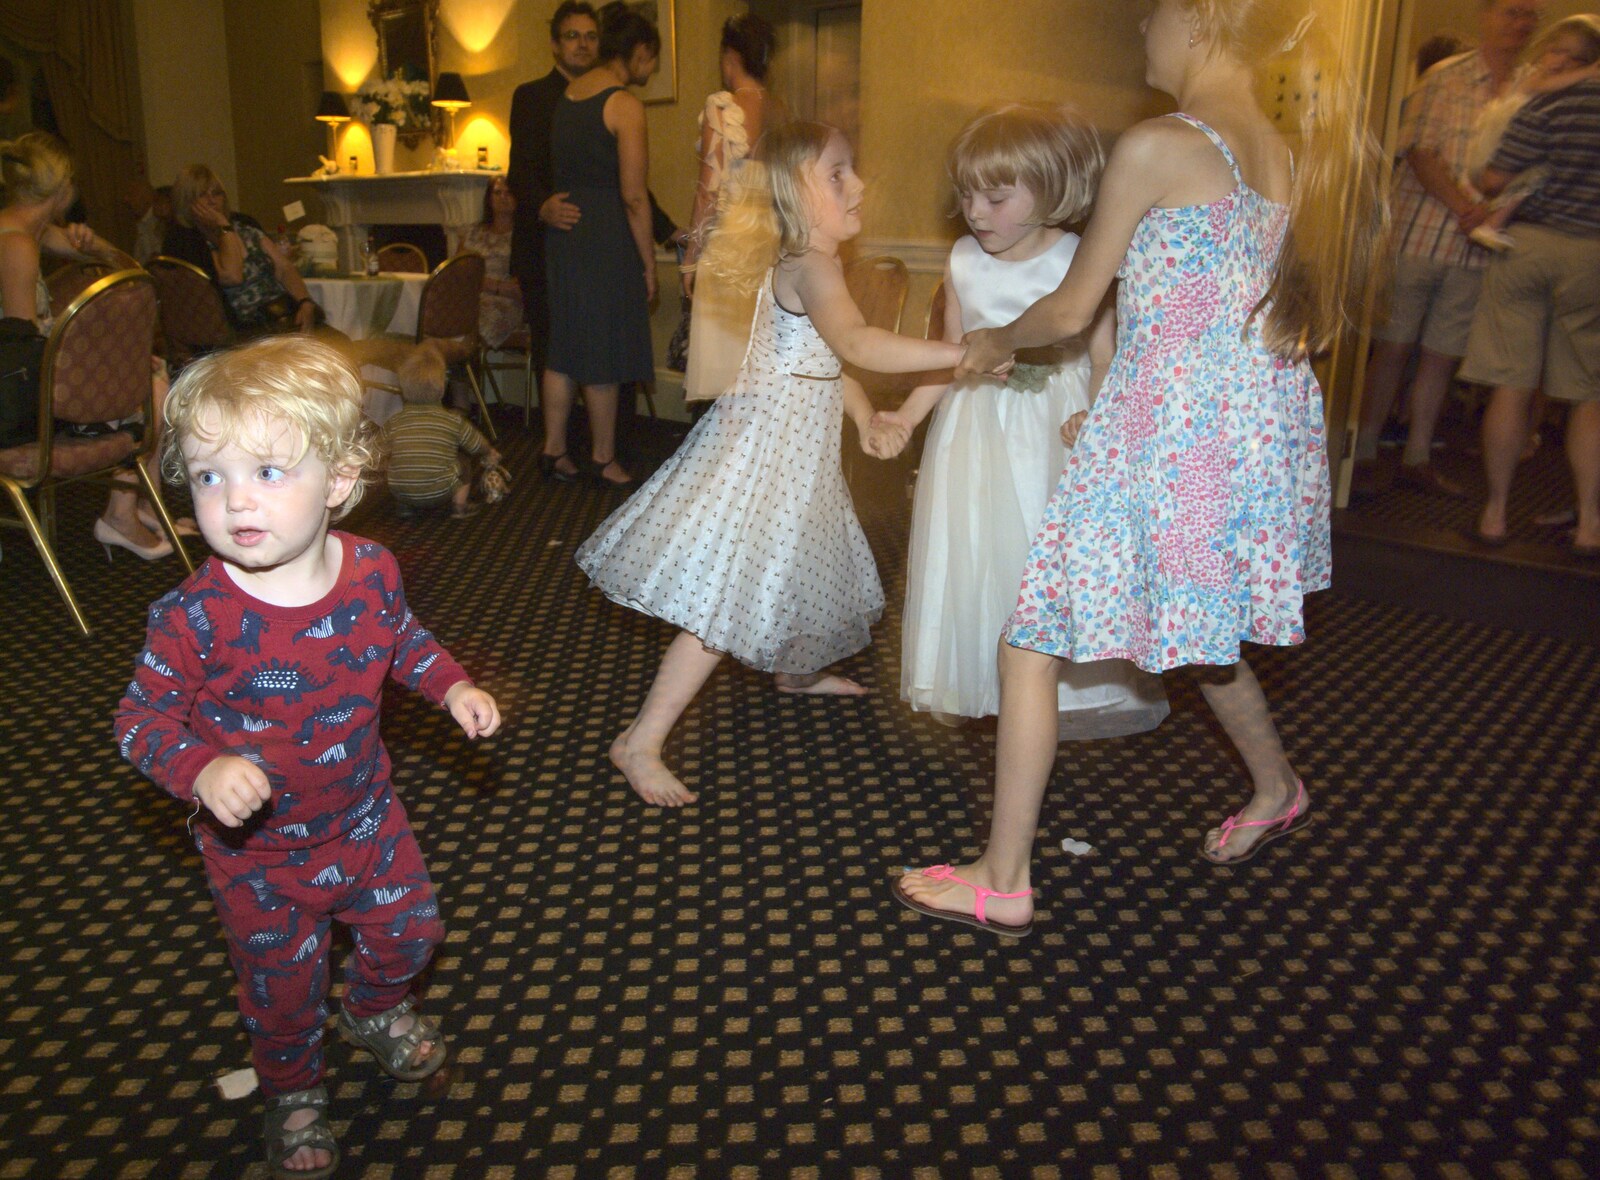 Fred dances in pyjamas from Clive and Suzanne's Wedding, Oakley and Brome, Suffolk - 10th July 2010